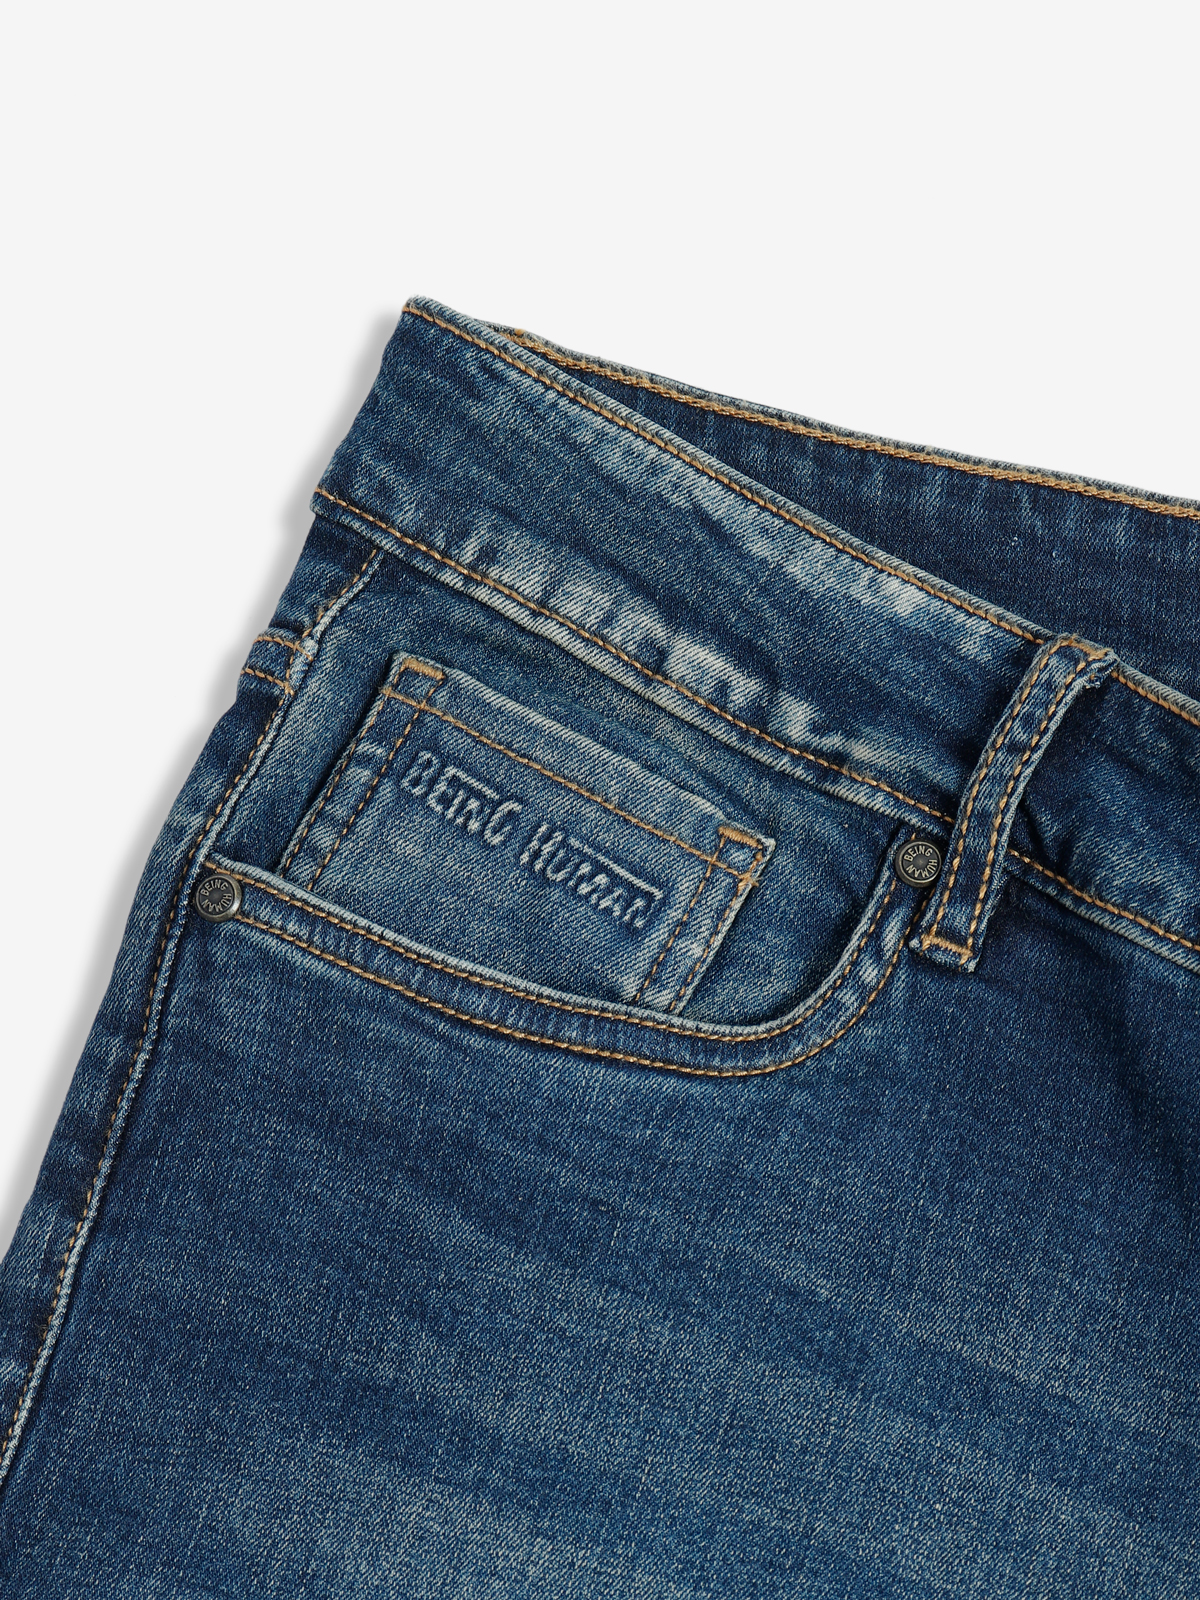 Mix Brand Jeans | The Brandster India - Retail